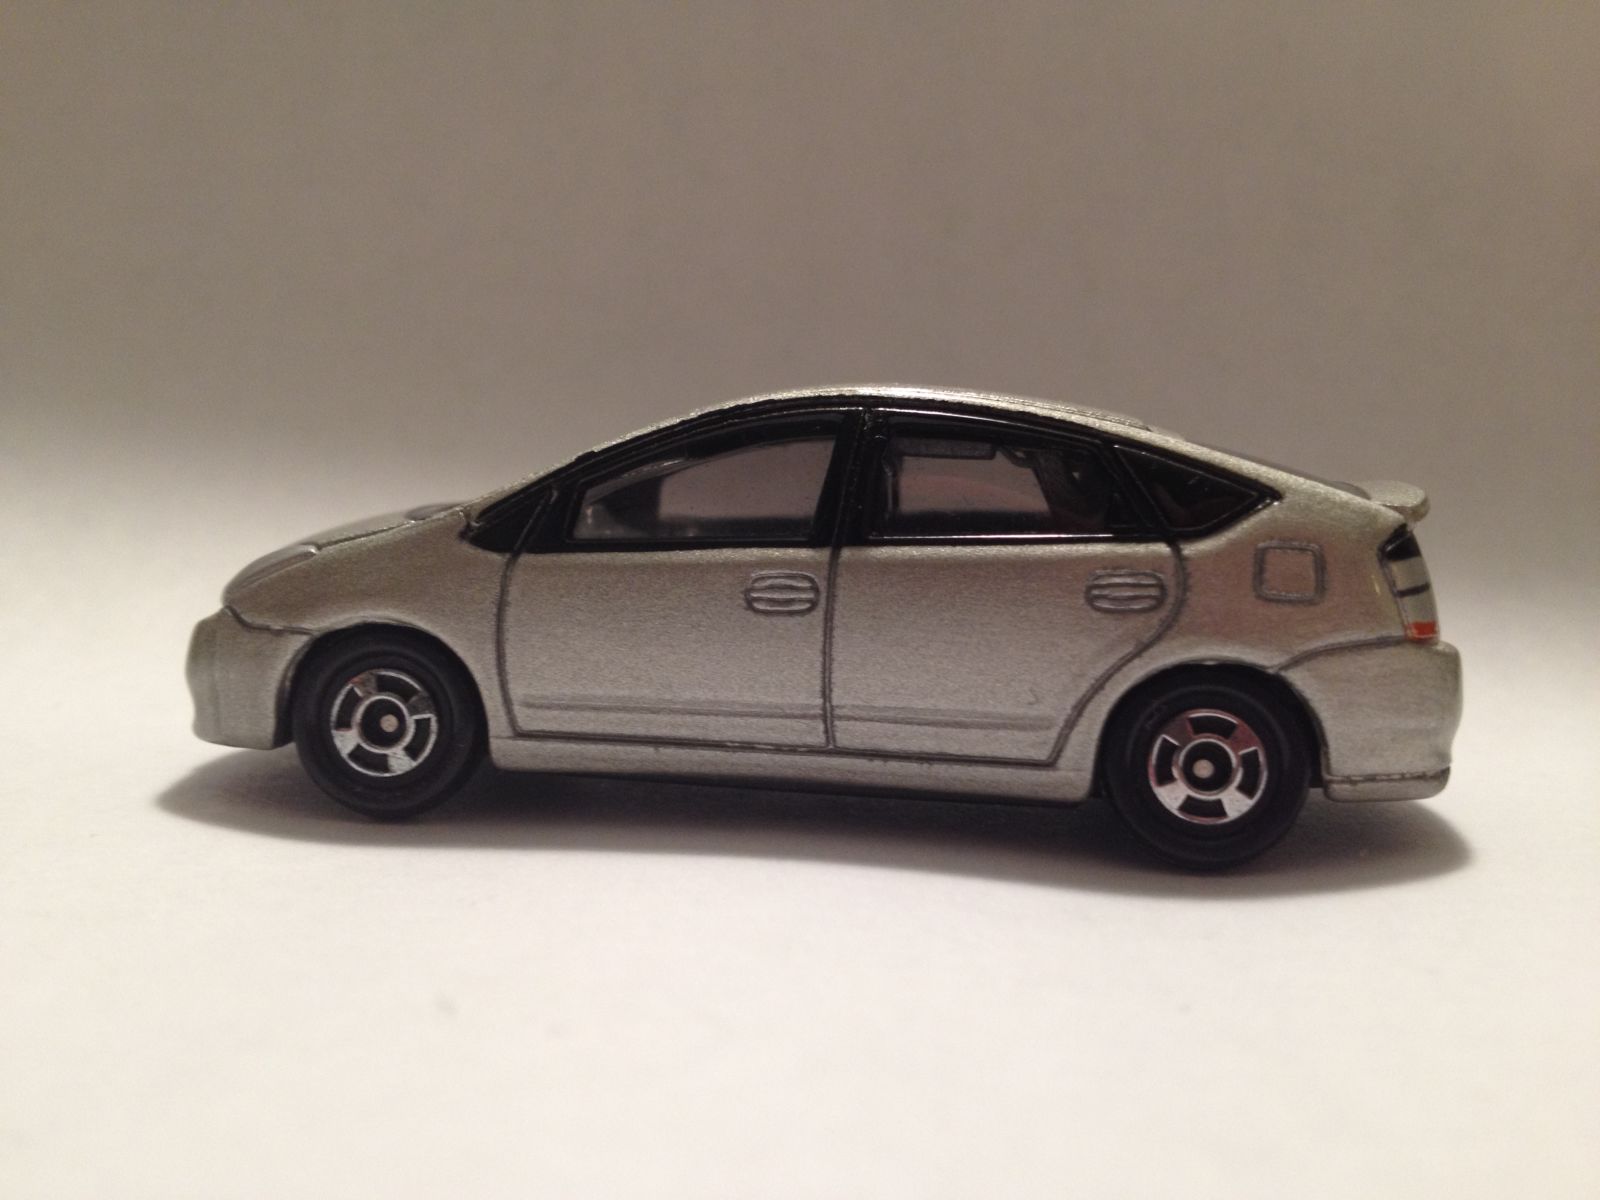 Illustration for article titled Tomica Toyota Prius Review